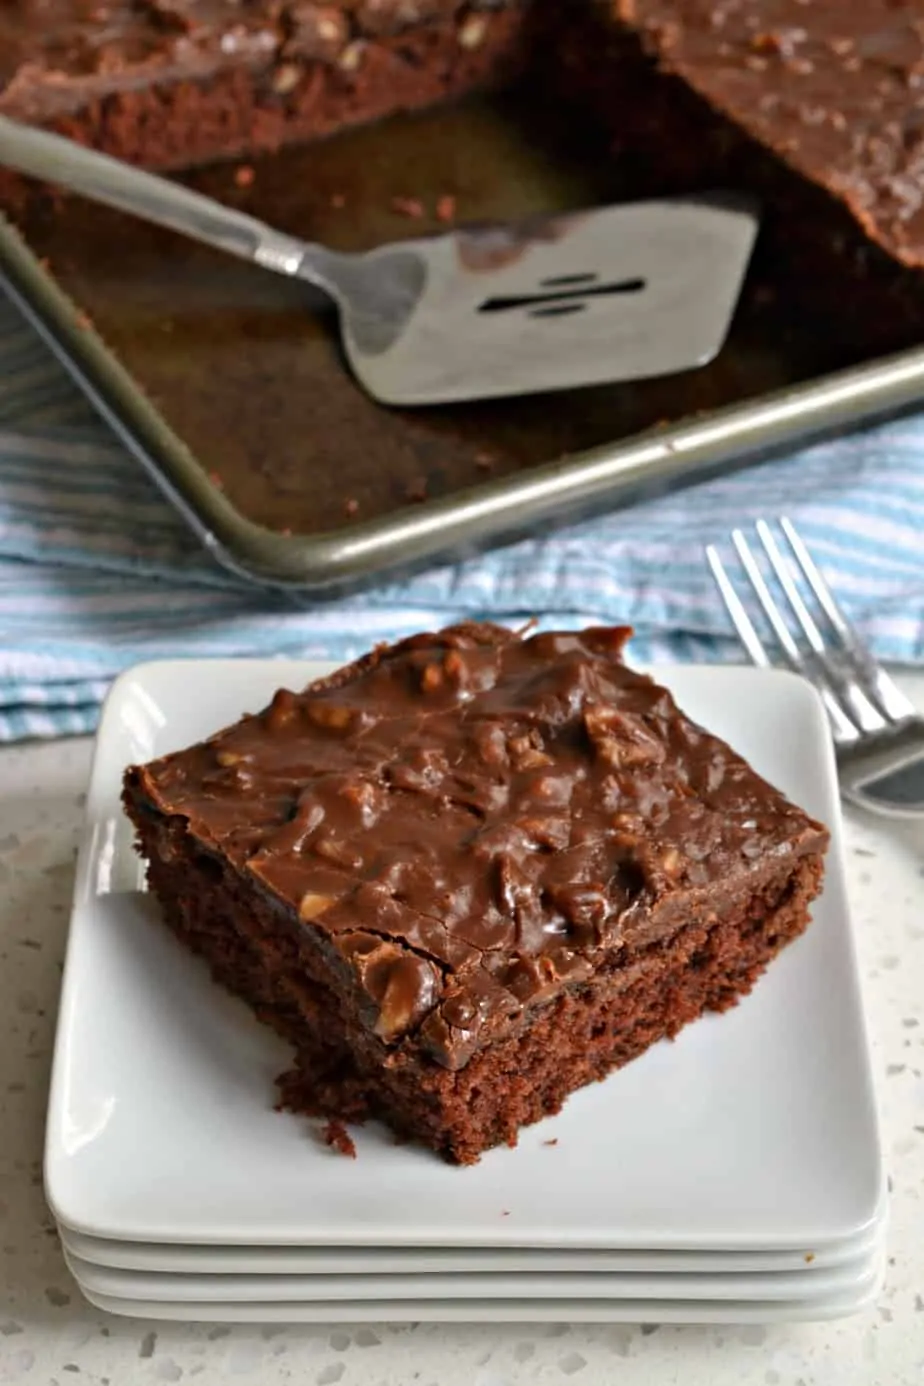 An easy moist chocolate cake baked in a jelly roll pan and topped with a luscious chocolate fudge frosting.